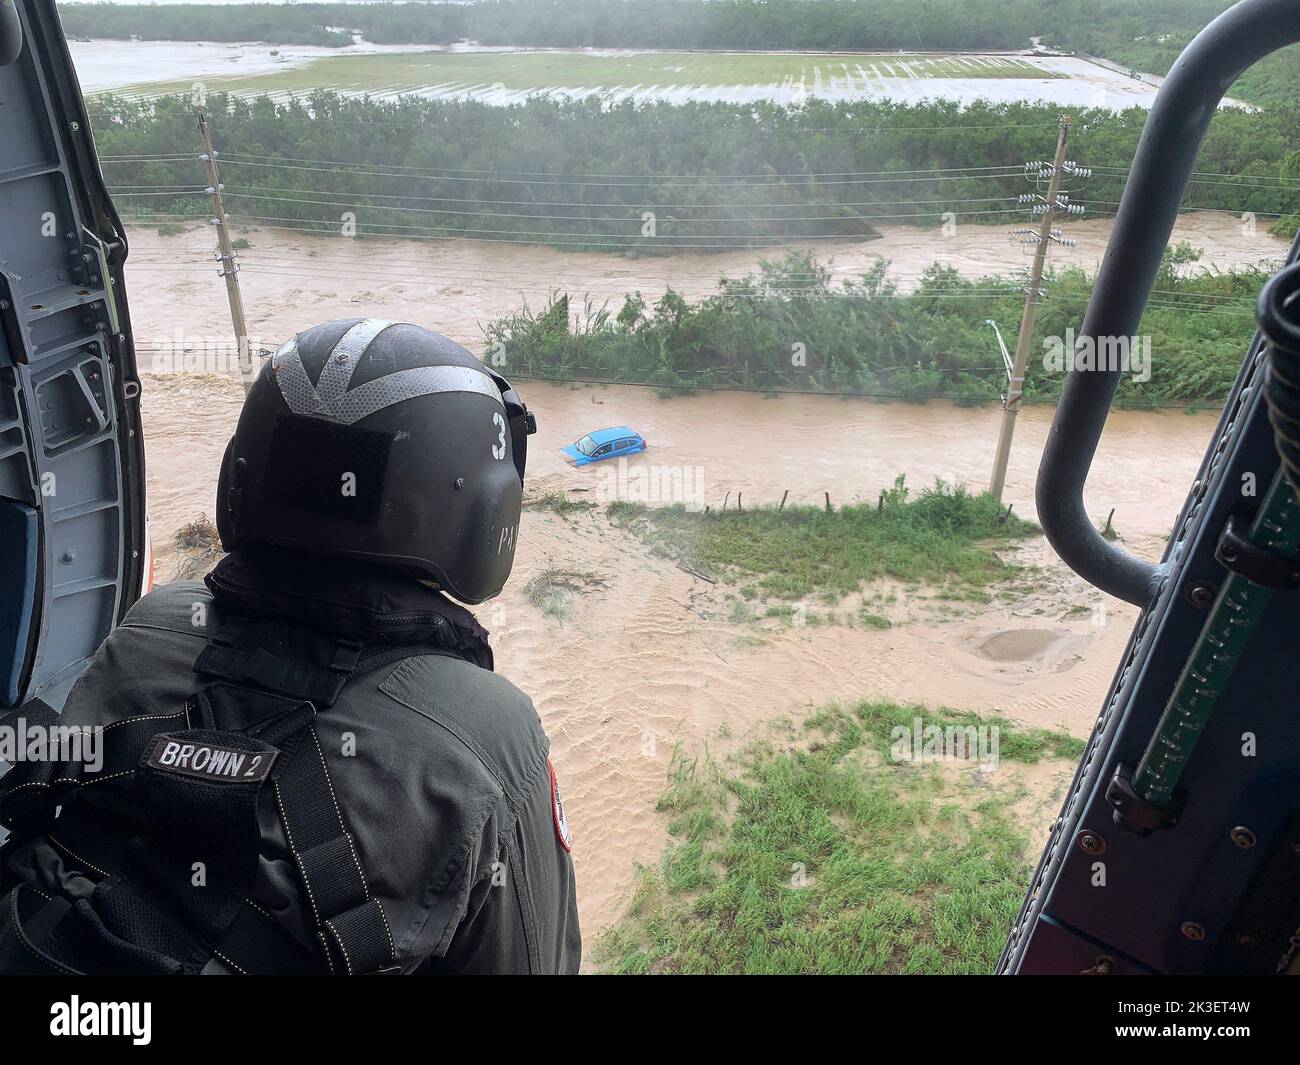 Salinas, United States. 19 September, 2022. A U.S. Coast Guard aircrew conduct an overflight of the southern coast searching for survivors in the aftermath of Hurricane Fiona, September 19, 2022 near Salinas, Puerto Rico. Credit: Capt. Robert Pirone/US Coast Guard/Alamy Live News Stock Photo